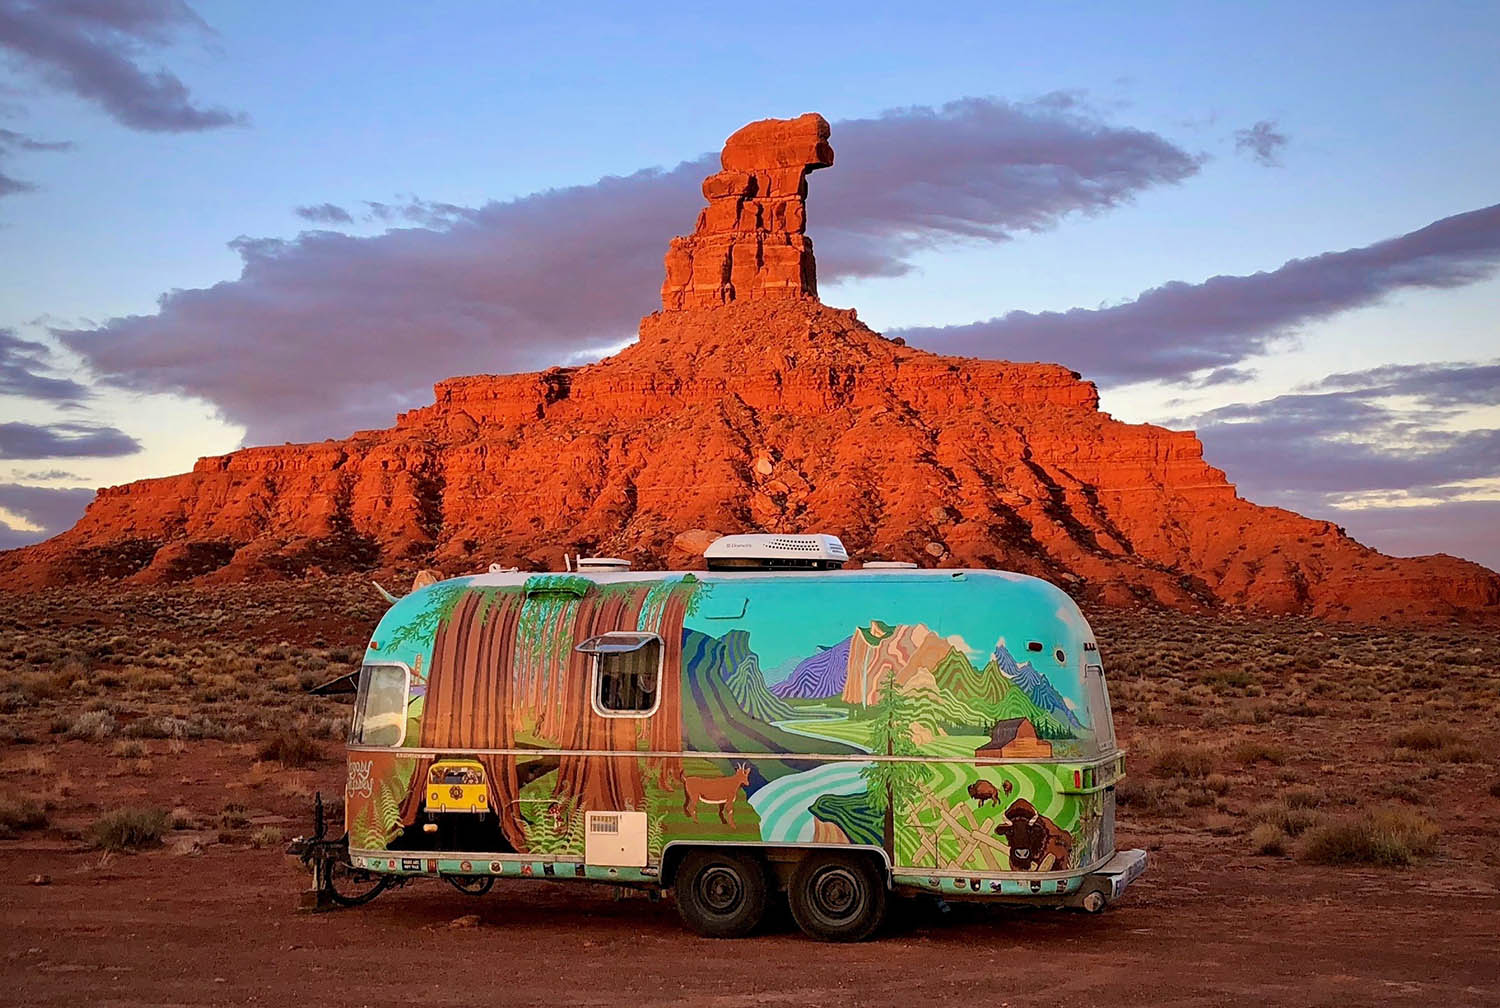 A rock spire thrusts toward the sky with a colorful trailer in foreground.